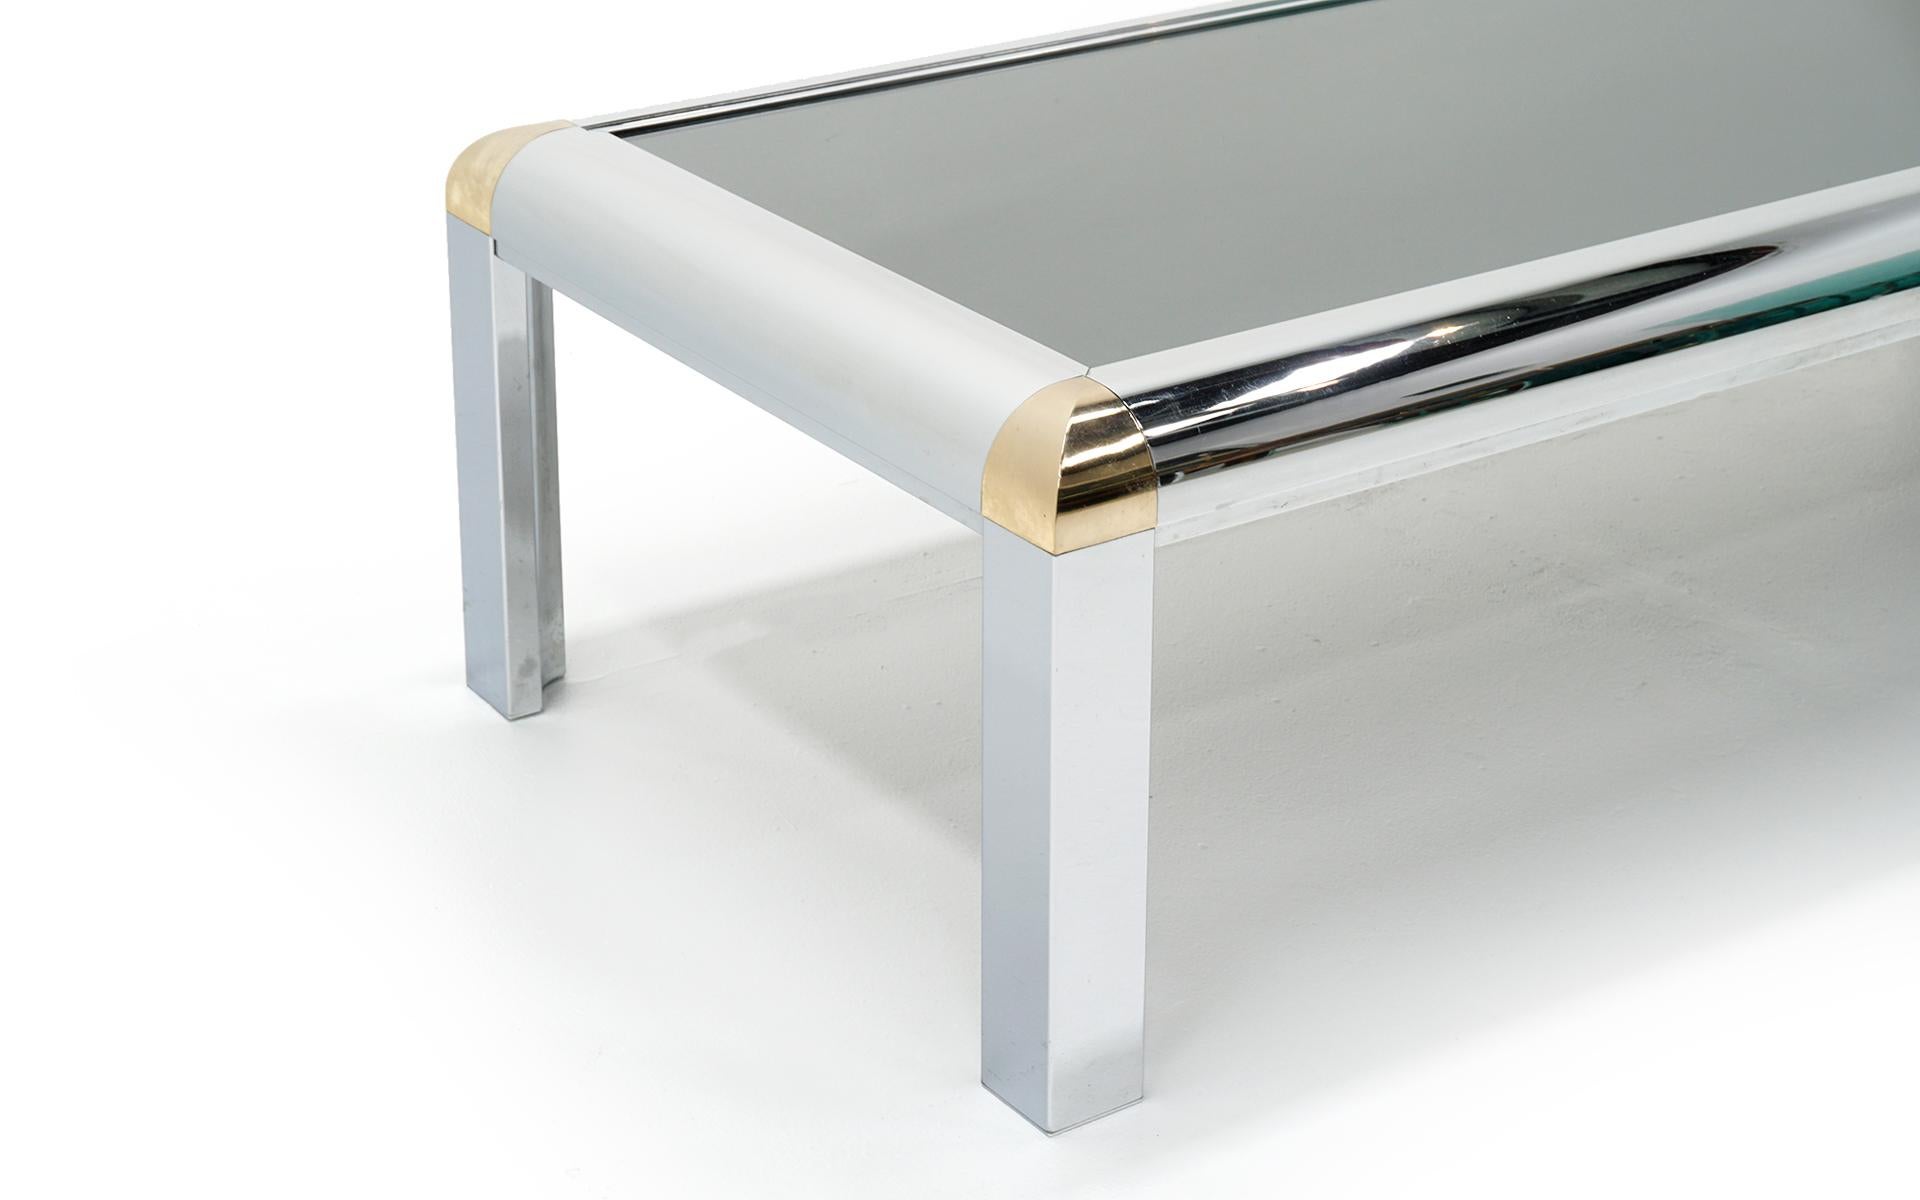 American Coffee Table with Wide Chrome Frame and Brass Corners, Smoked Glass Top, 1970s